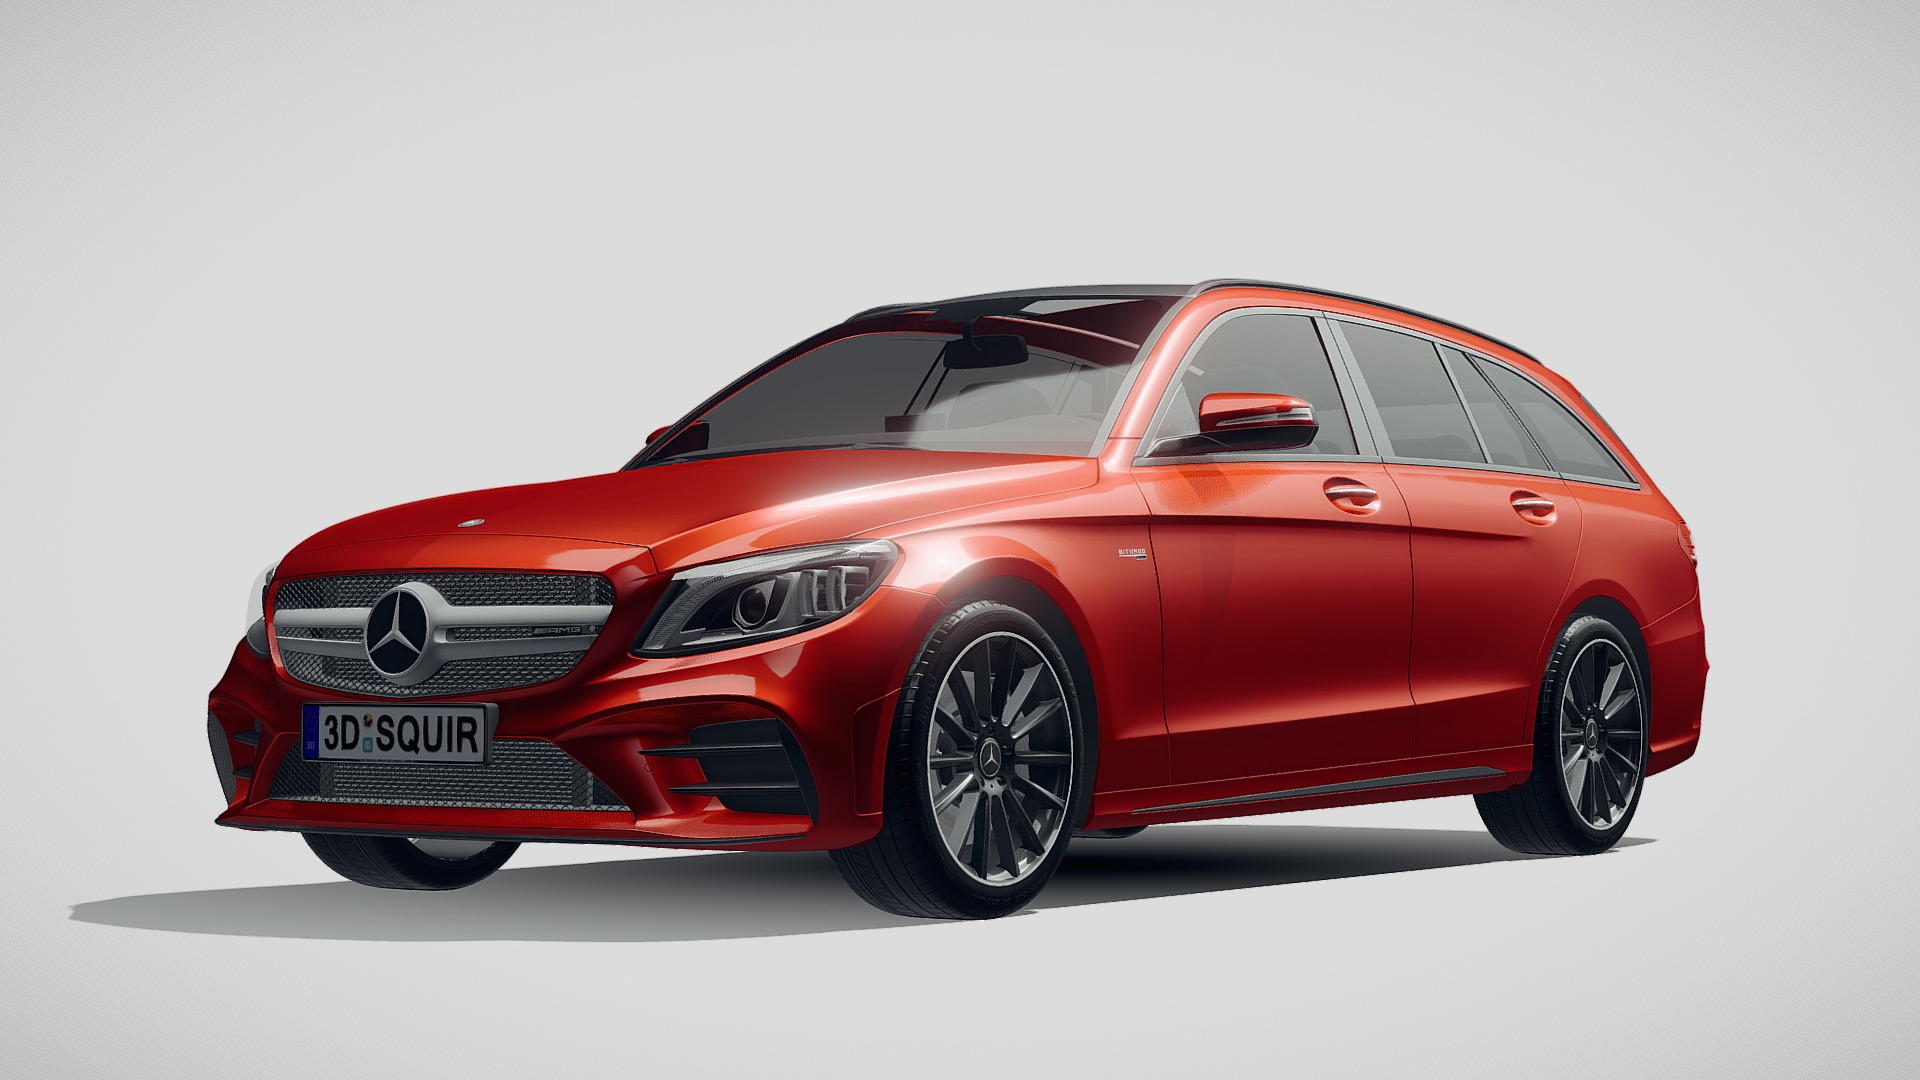 3D model Mercedes C class Estate AMG 2019 - This is a 3D model of the Mercedes C class Estate AMG 2019. The 3D model is about a red car with a white background.